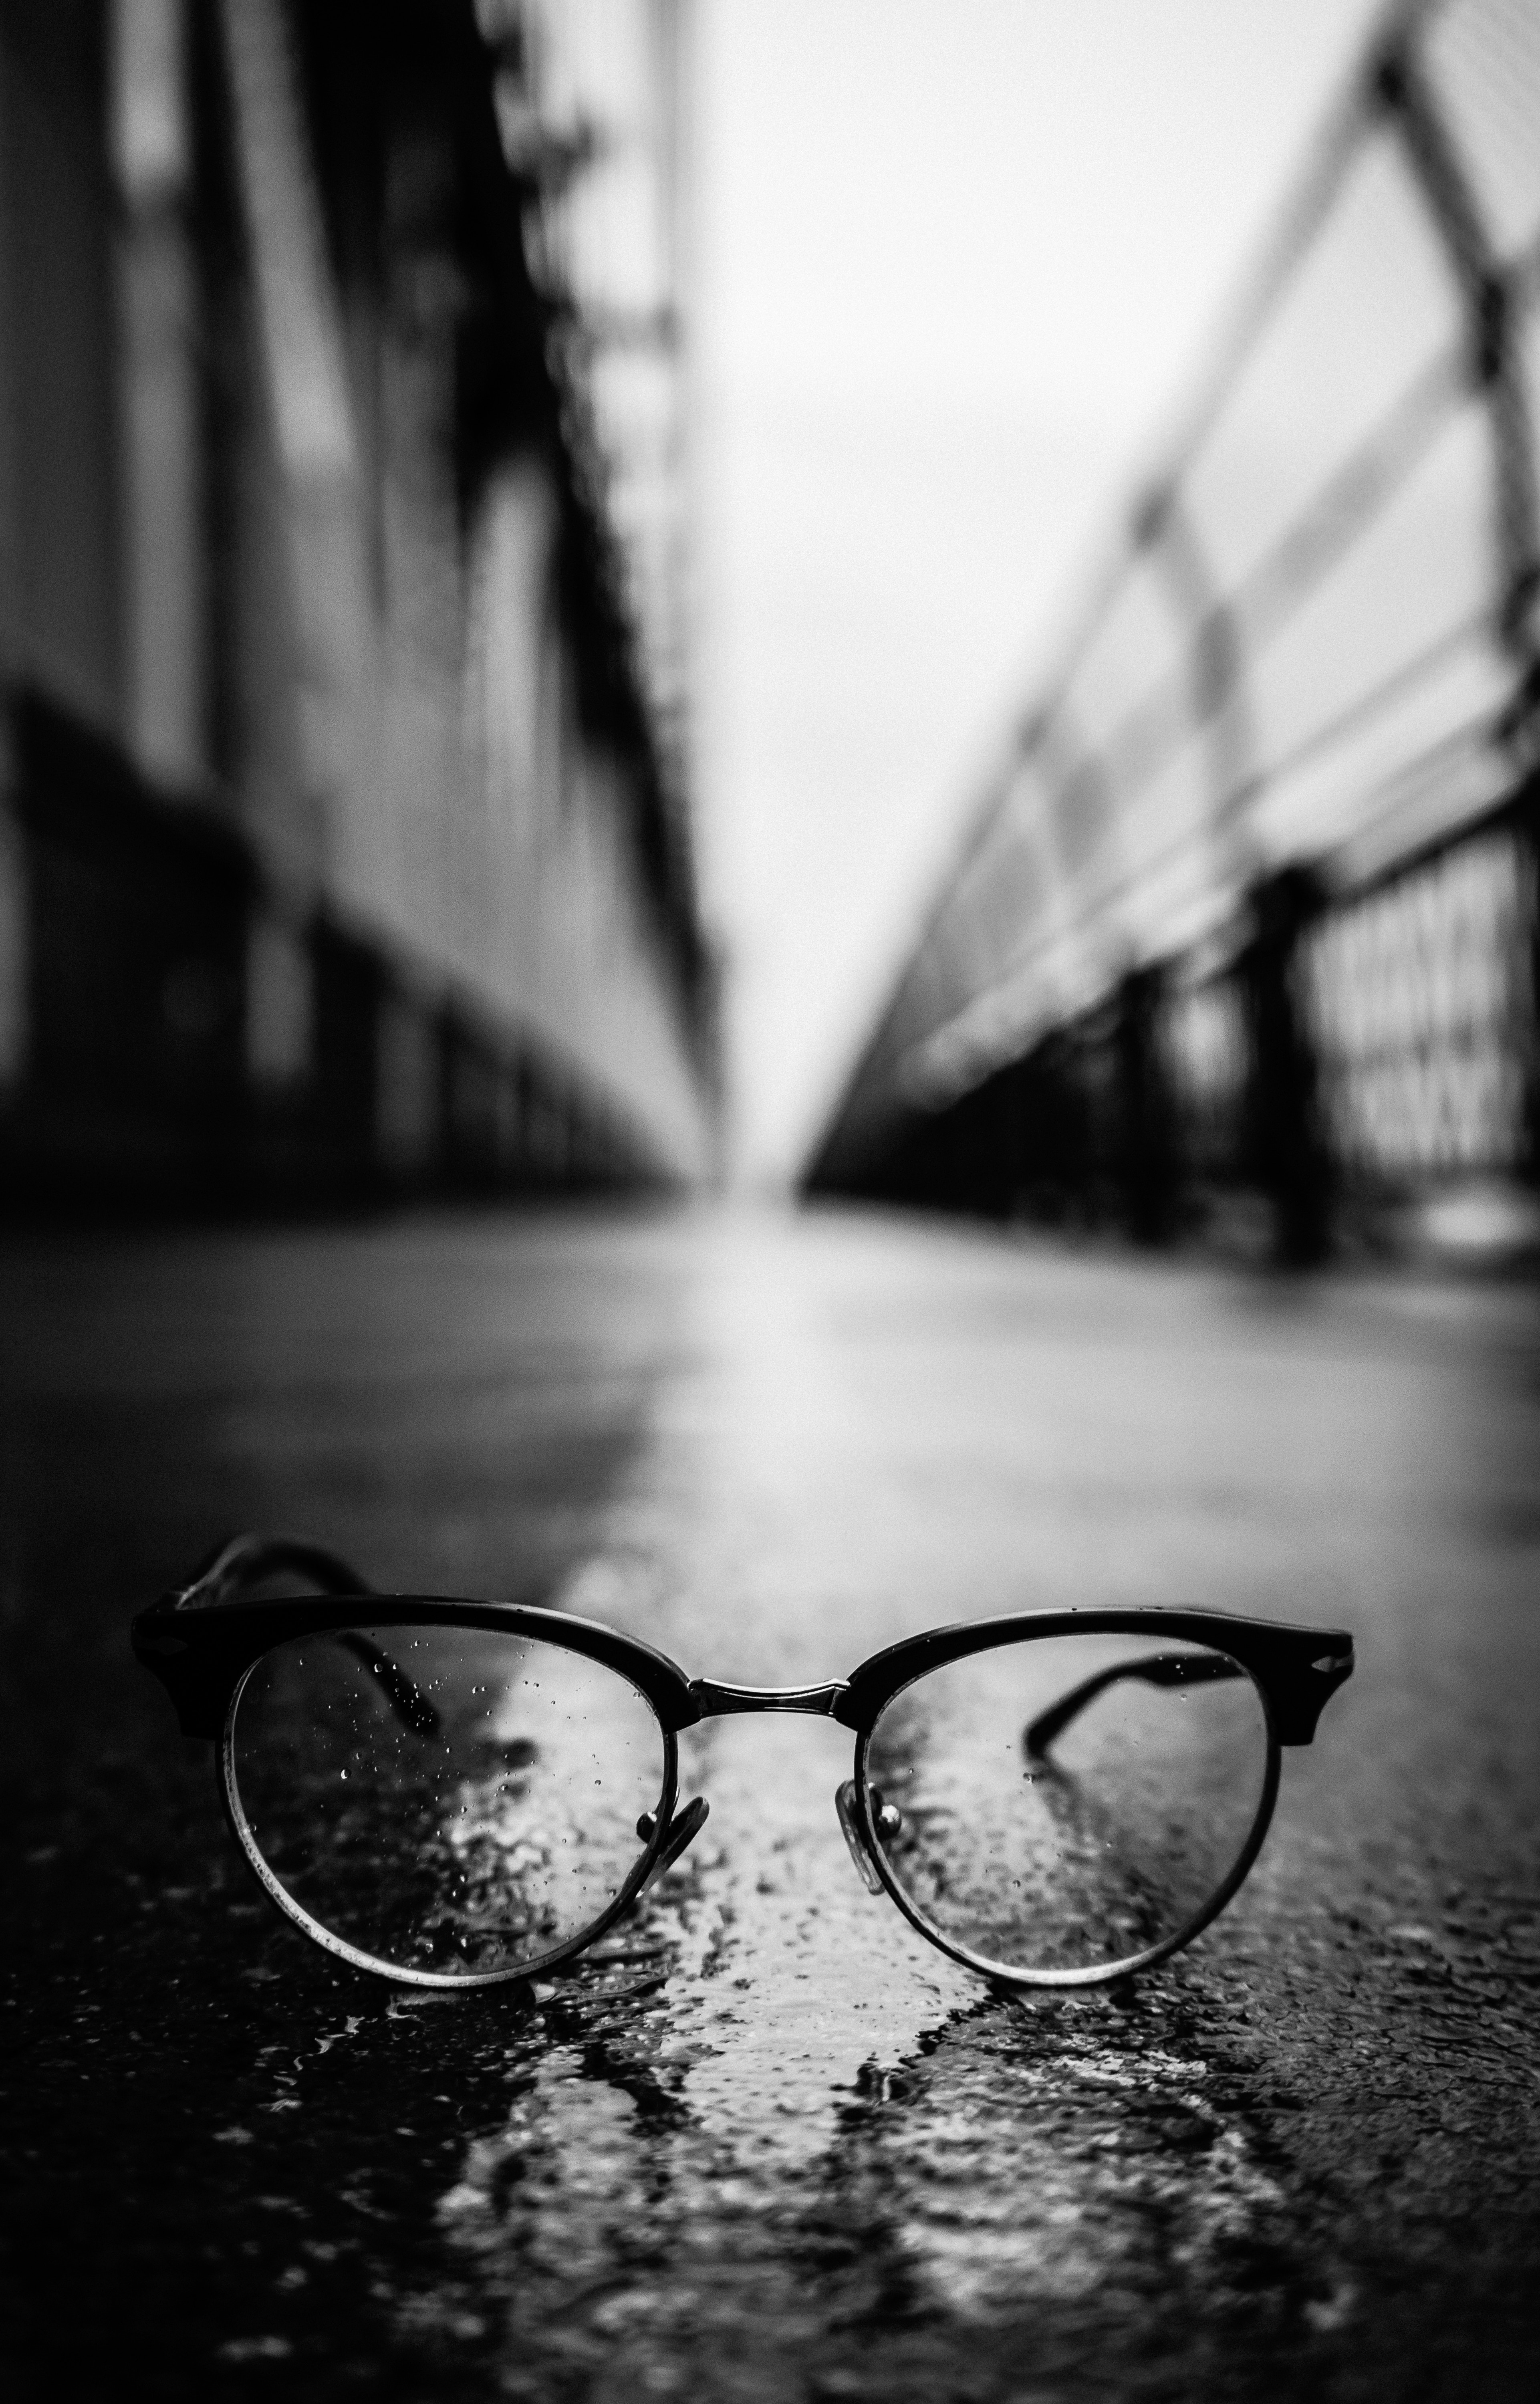 close up, bw, dark, chb, glasses, spectacles